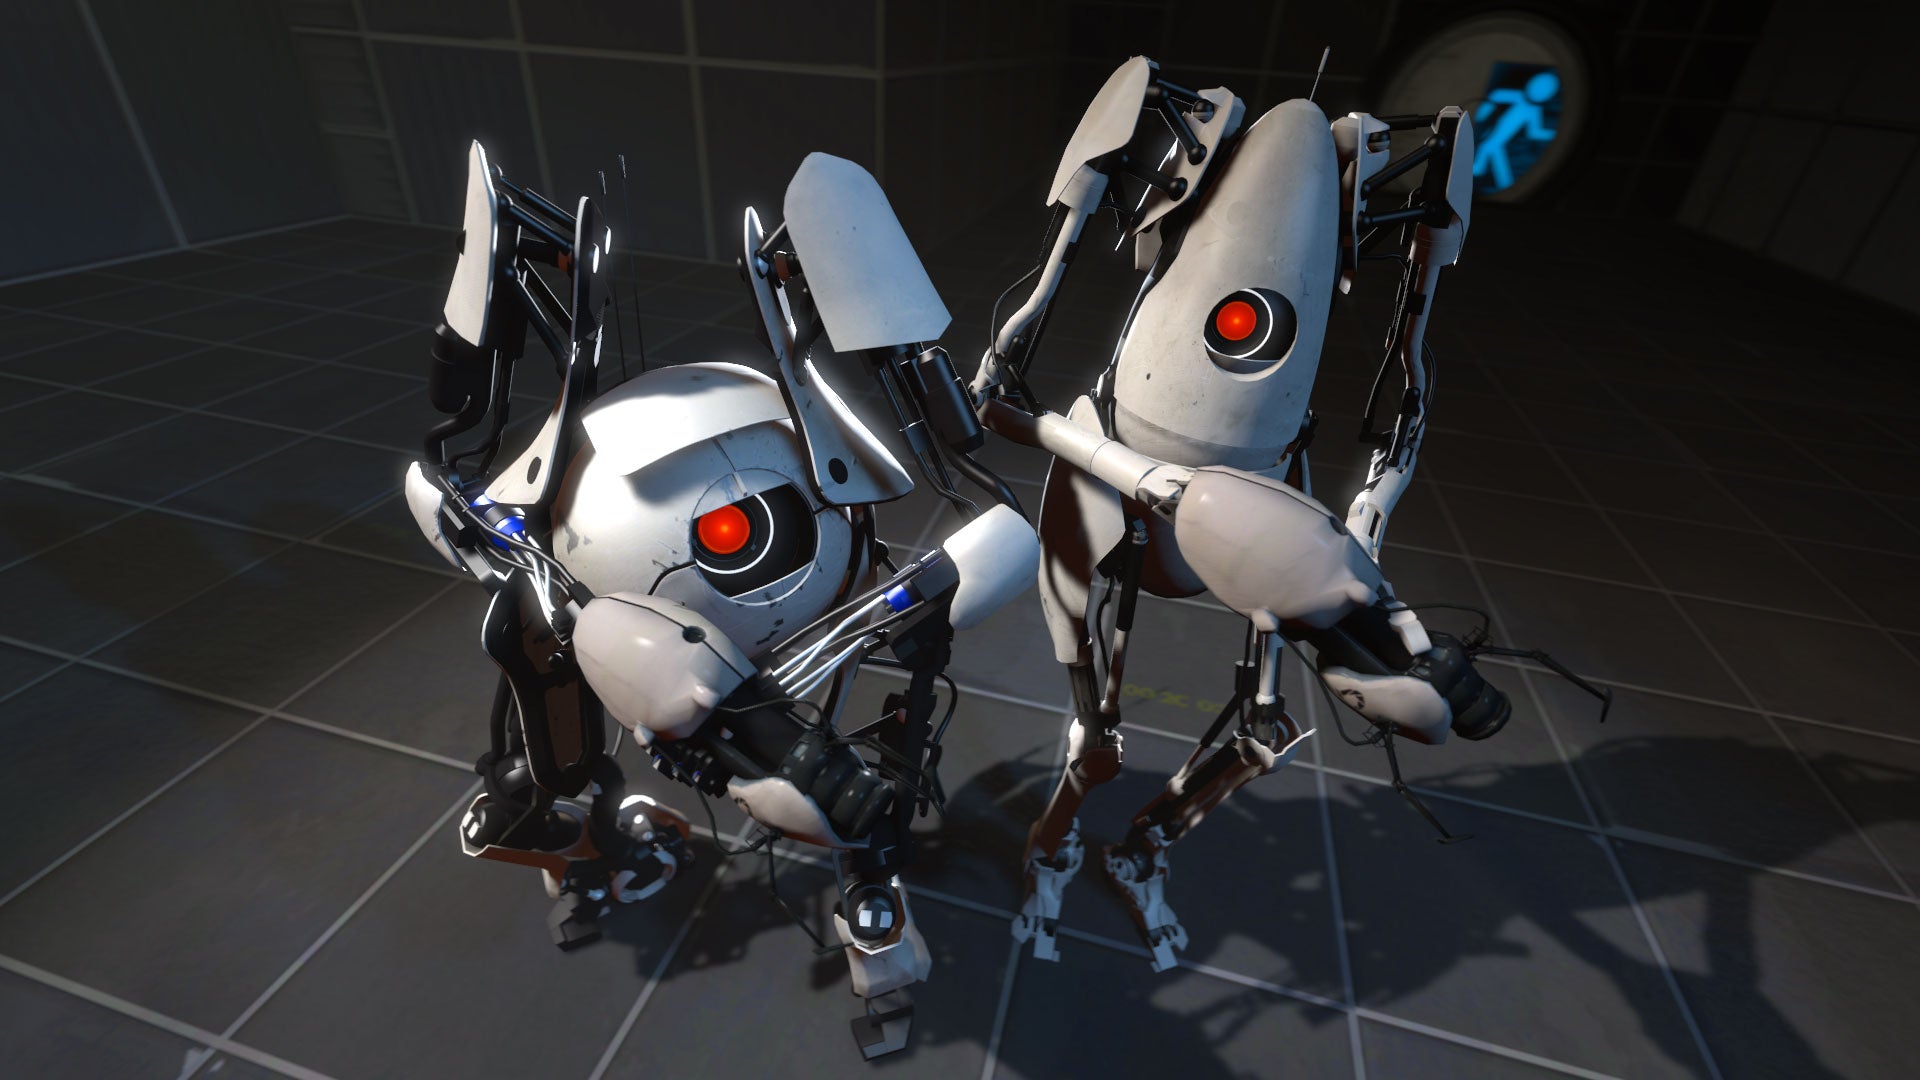 The two robot pals get ready to solve puzzles in Portal 2